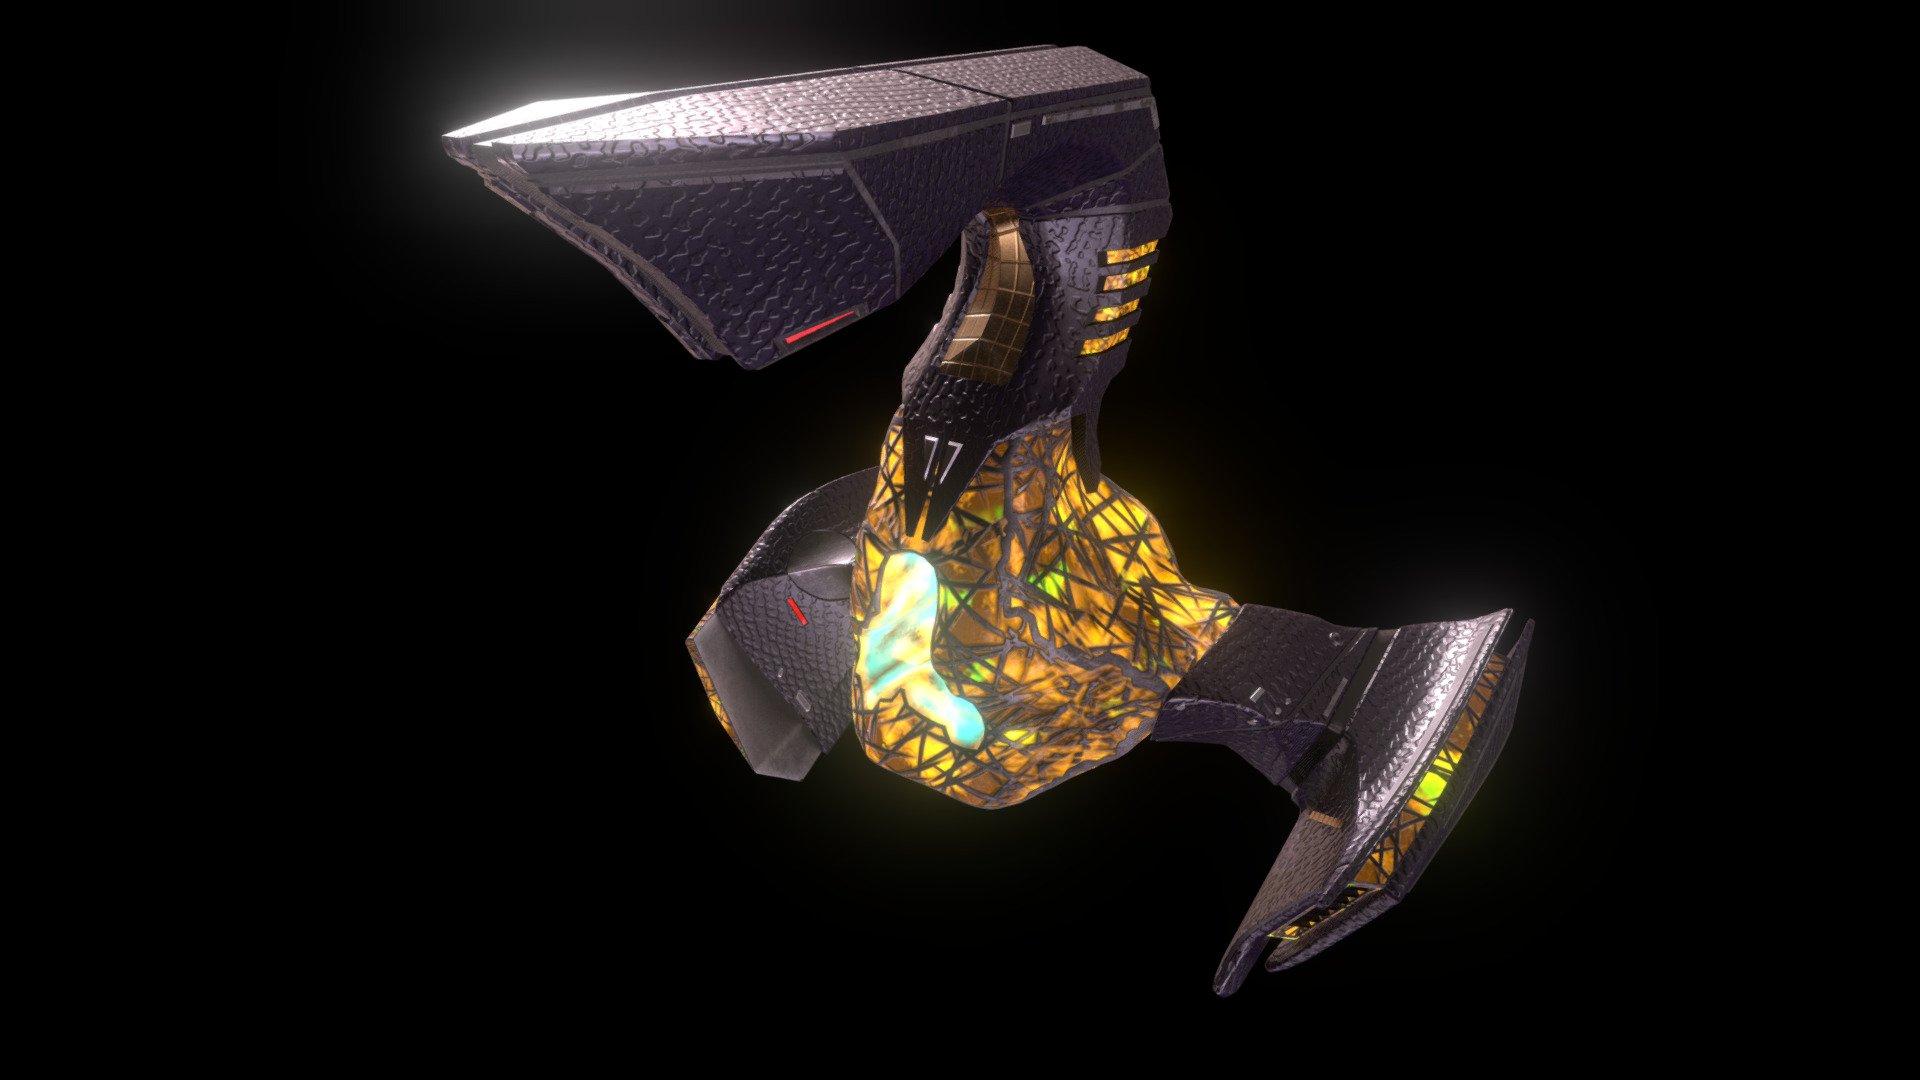 My 3D model of the Gorn Hunter starship used by the Gorn during the mid 23rd century, facing conflicts with Starfleet. This ship design was seen in Star Trek: Strange New Worlds. Original design by Daniel J Burns.

You can purchase it here: https://ko-fi.com/s/0c6fc7f401 - Gorn Hunter (Star Trek: Strange New Worlds) - 3D model by Pundus Art (@Pundus_Art) 3d model